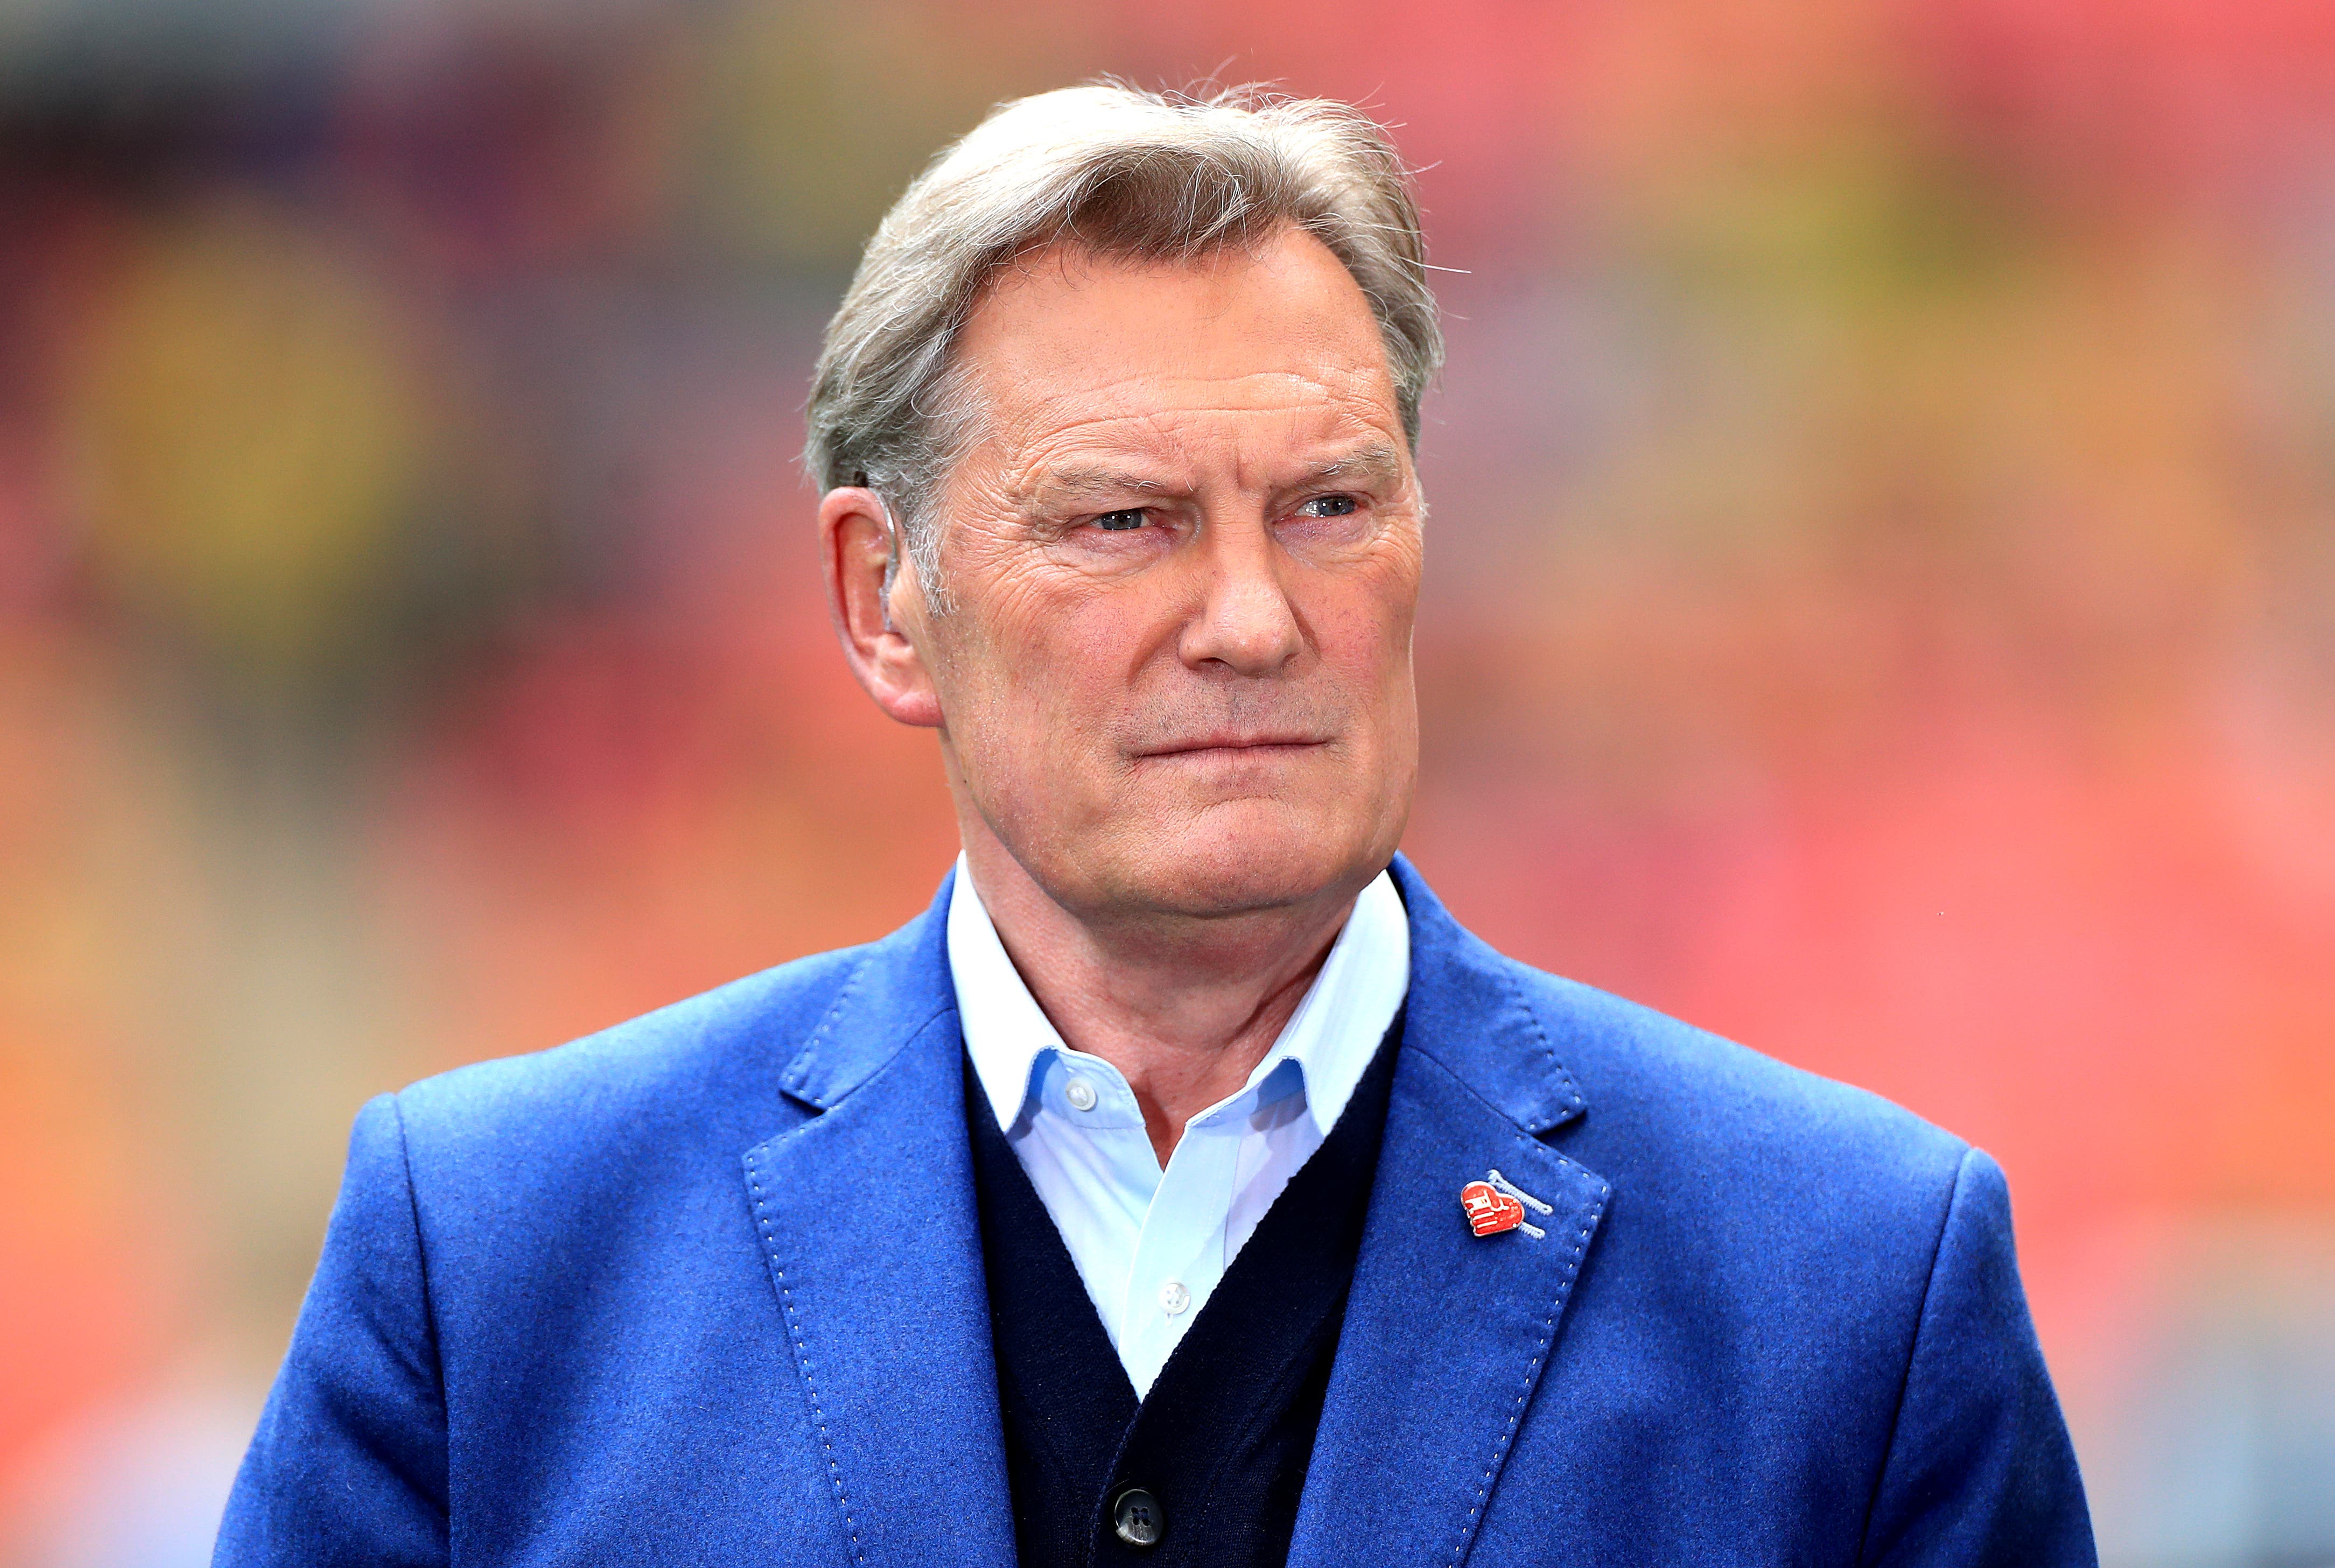 Only winning Euro 2020 would make England 'special', Glenn Hoddle insists | The Independent